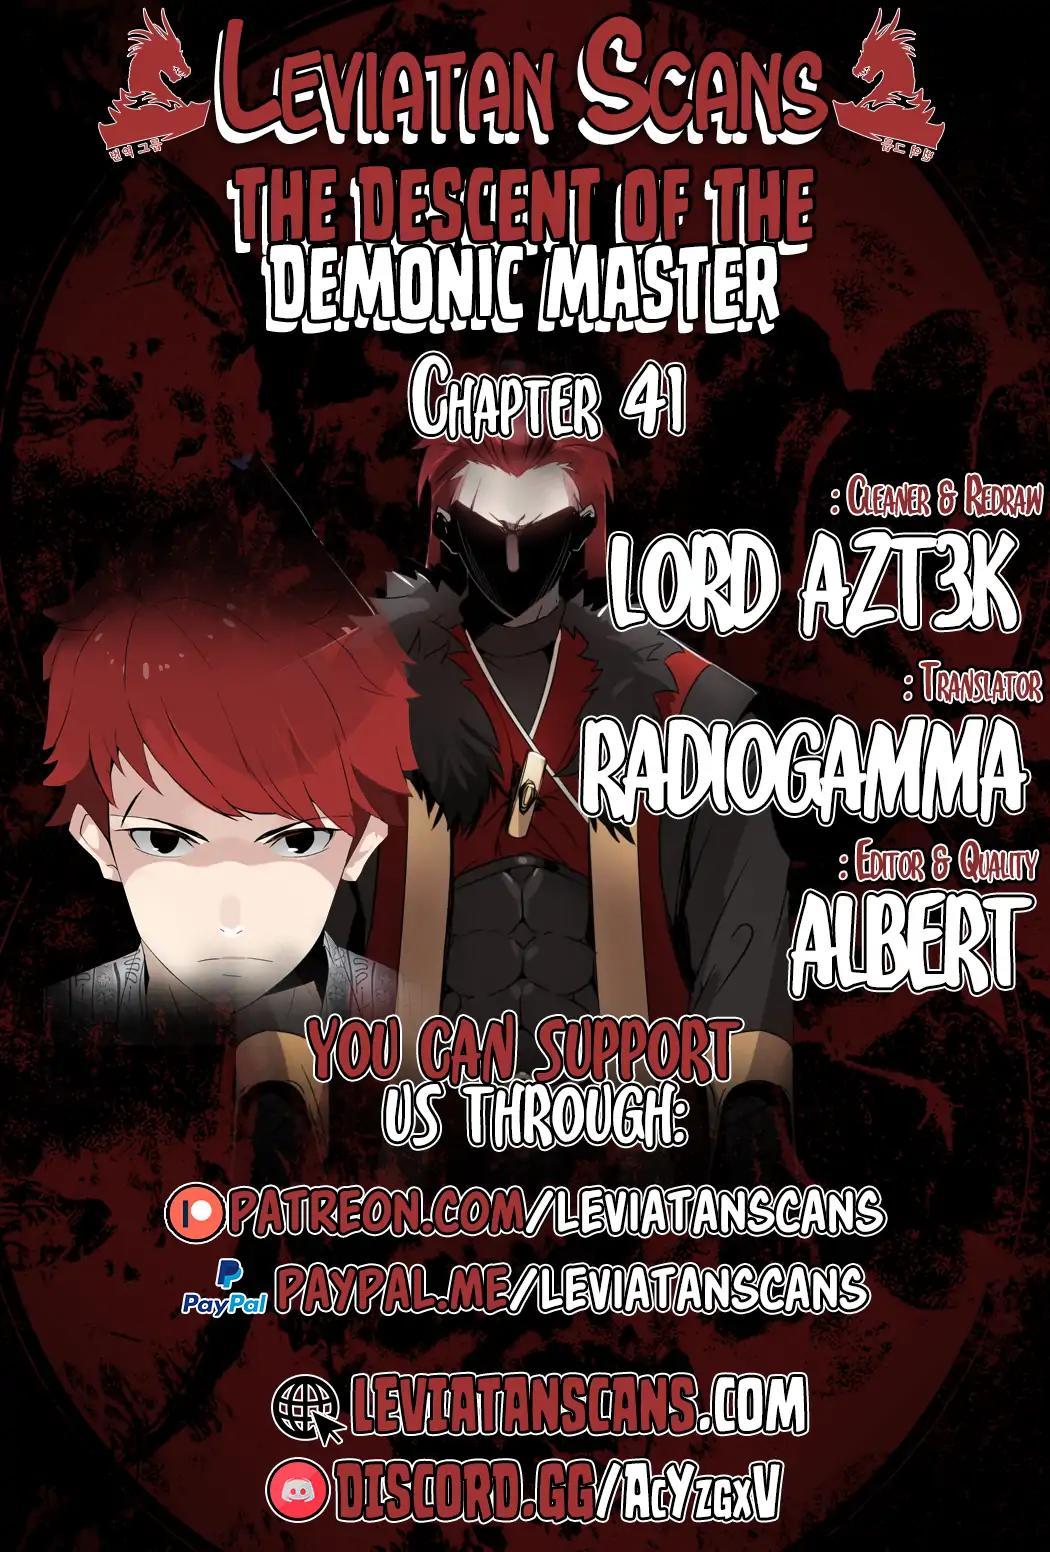 The Descent of the Demonic Master Chapter 41